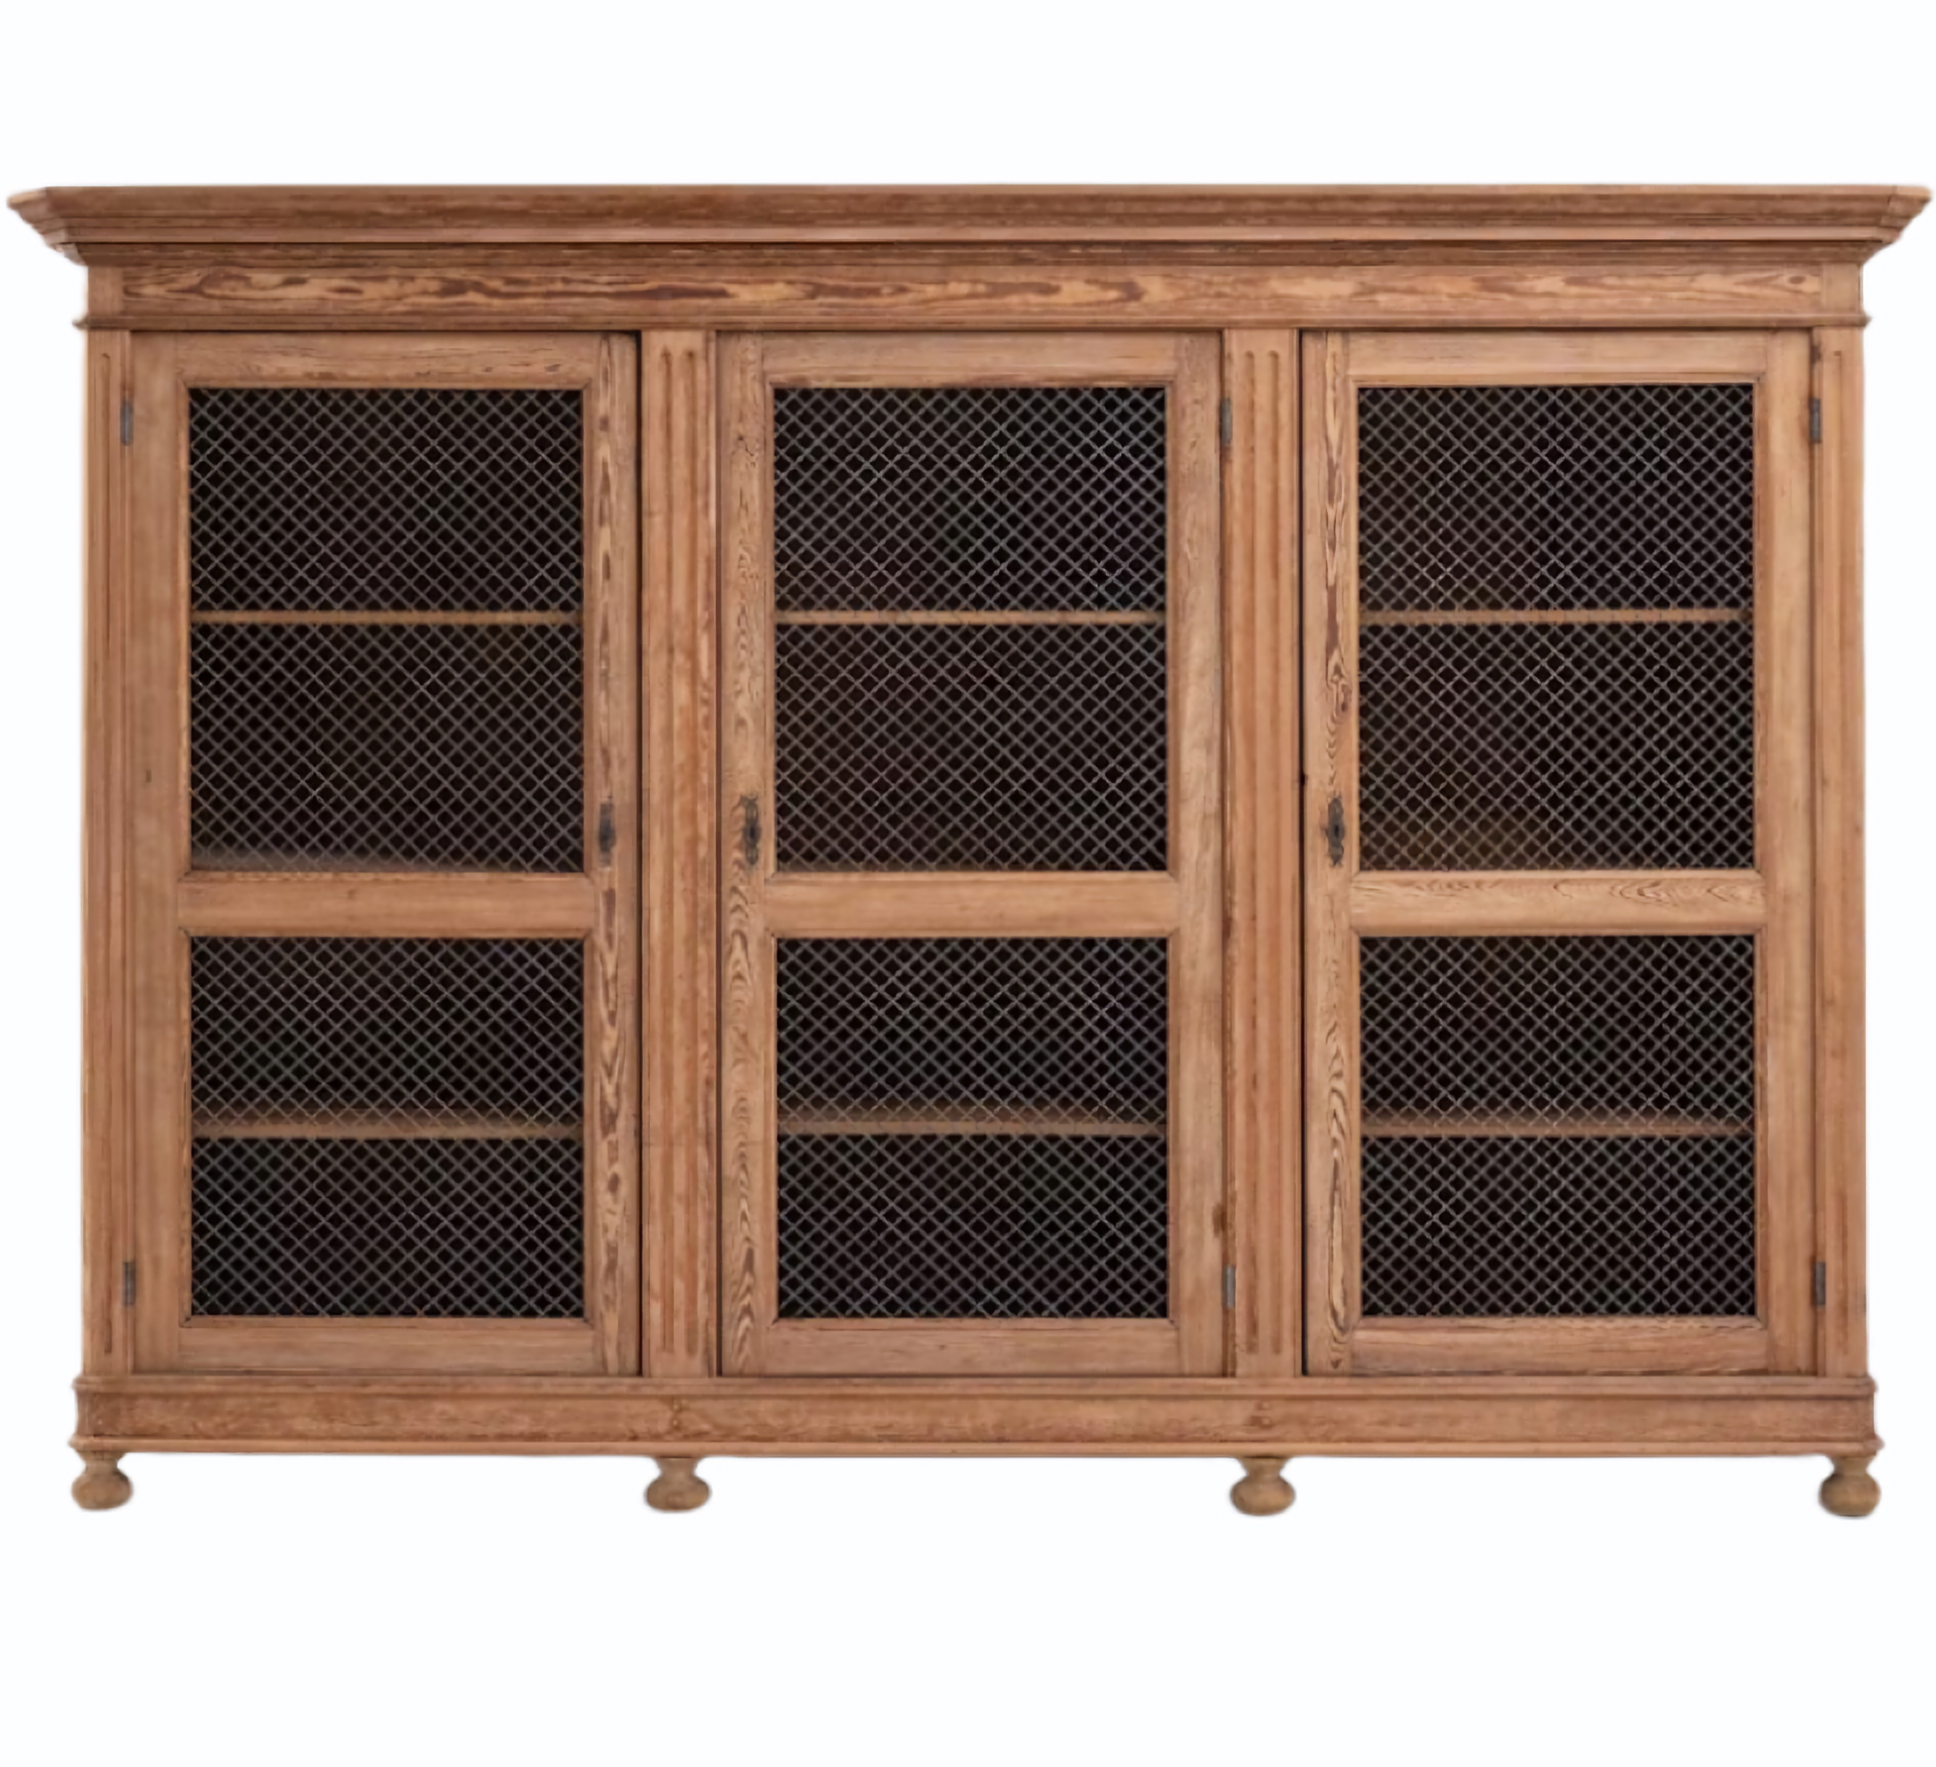 Antique French Country Mesh Wire Door Cabinet, Circa 1850